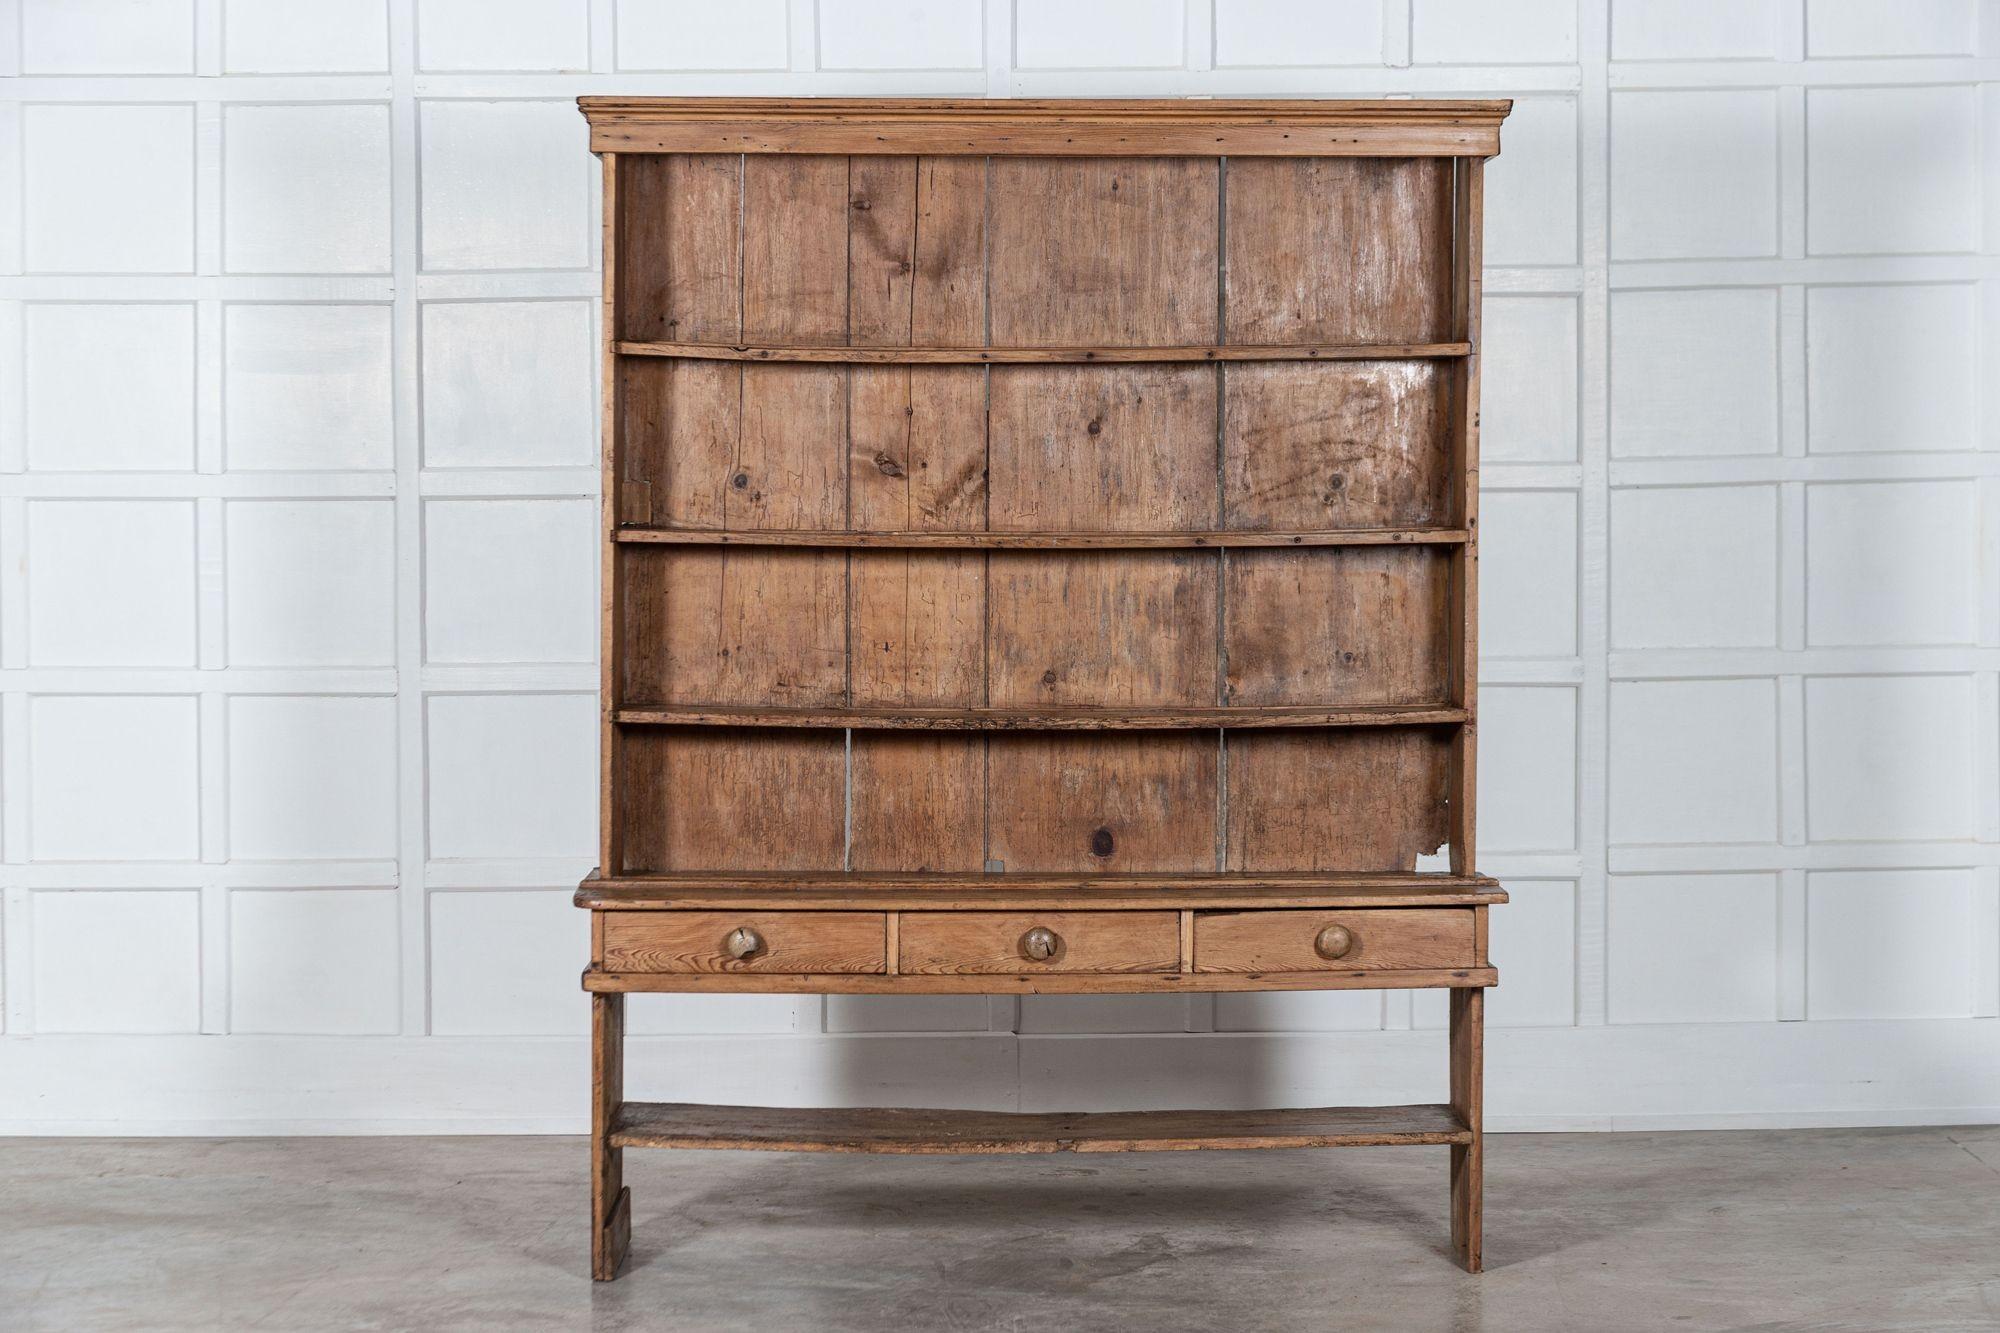 circa 1800
19thC English pine Vernacular dresser
Provenance: Victorian Country School. Sixpenny Handley, Wiltshire.
Property known as Champs Farmhouse, Woodcuts, Cranborne Chase.
We can also customise existing pieces to suit your